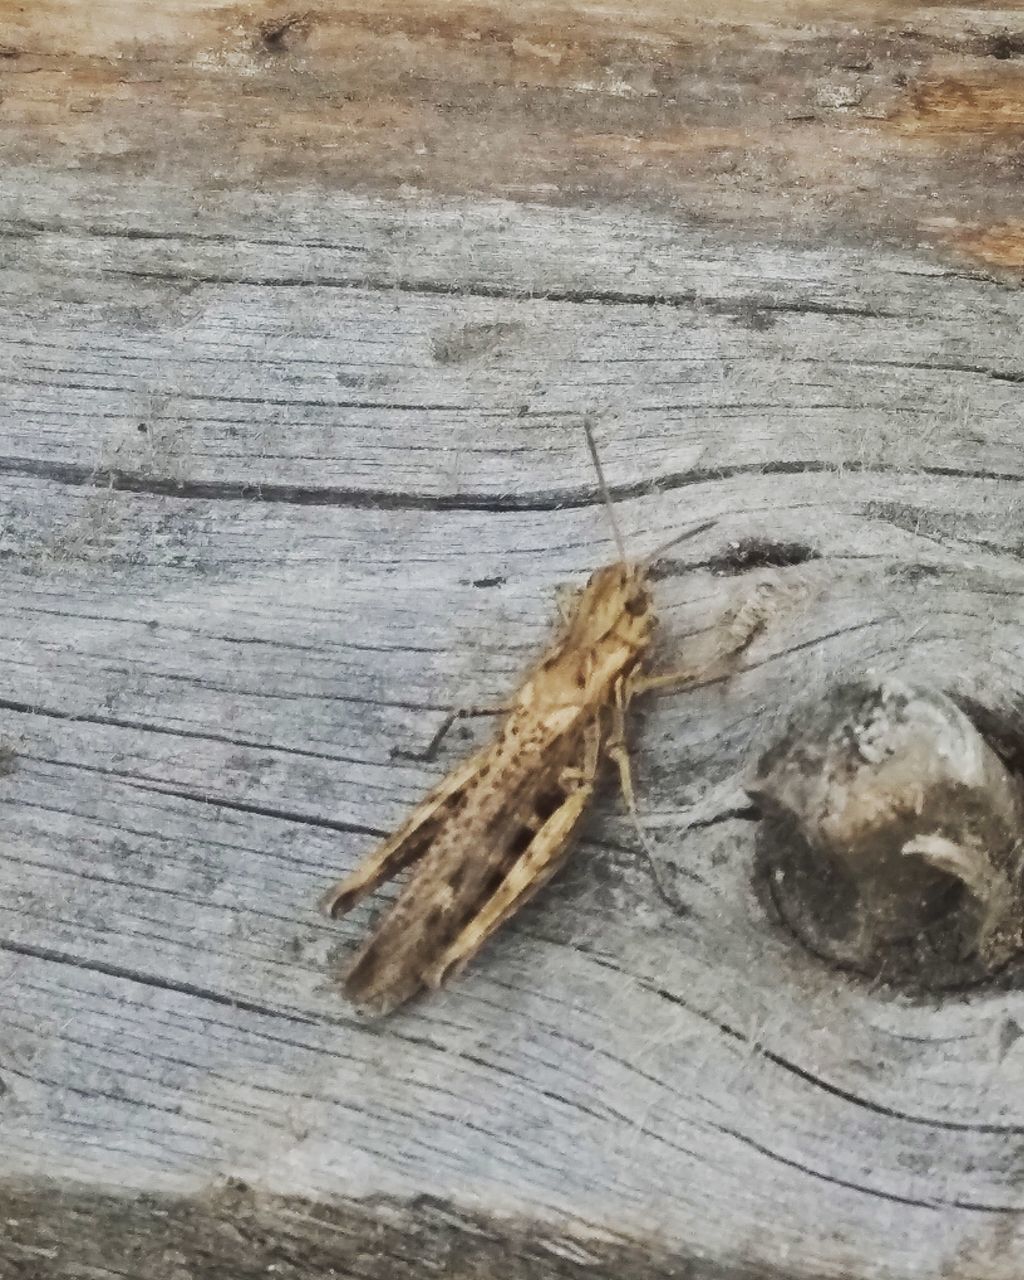 CLOSE-UP OF INSECT ON WOOD